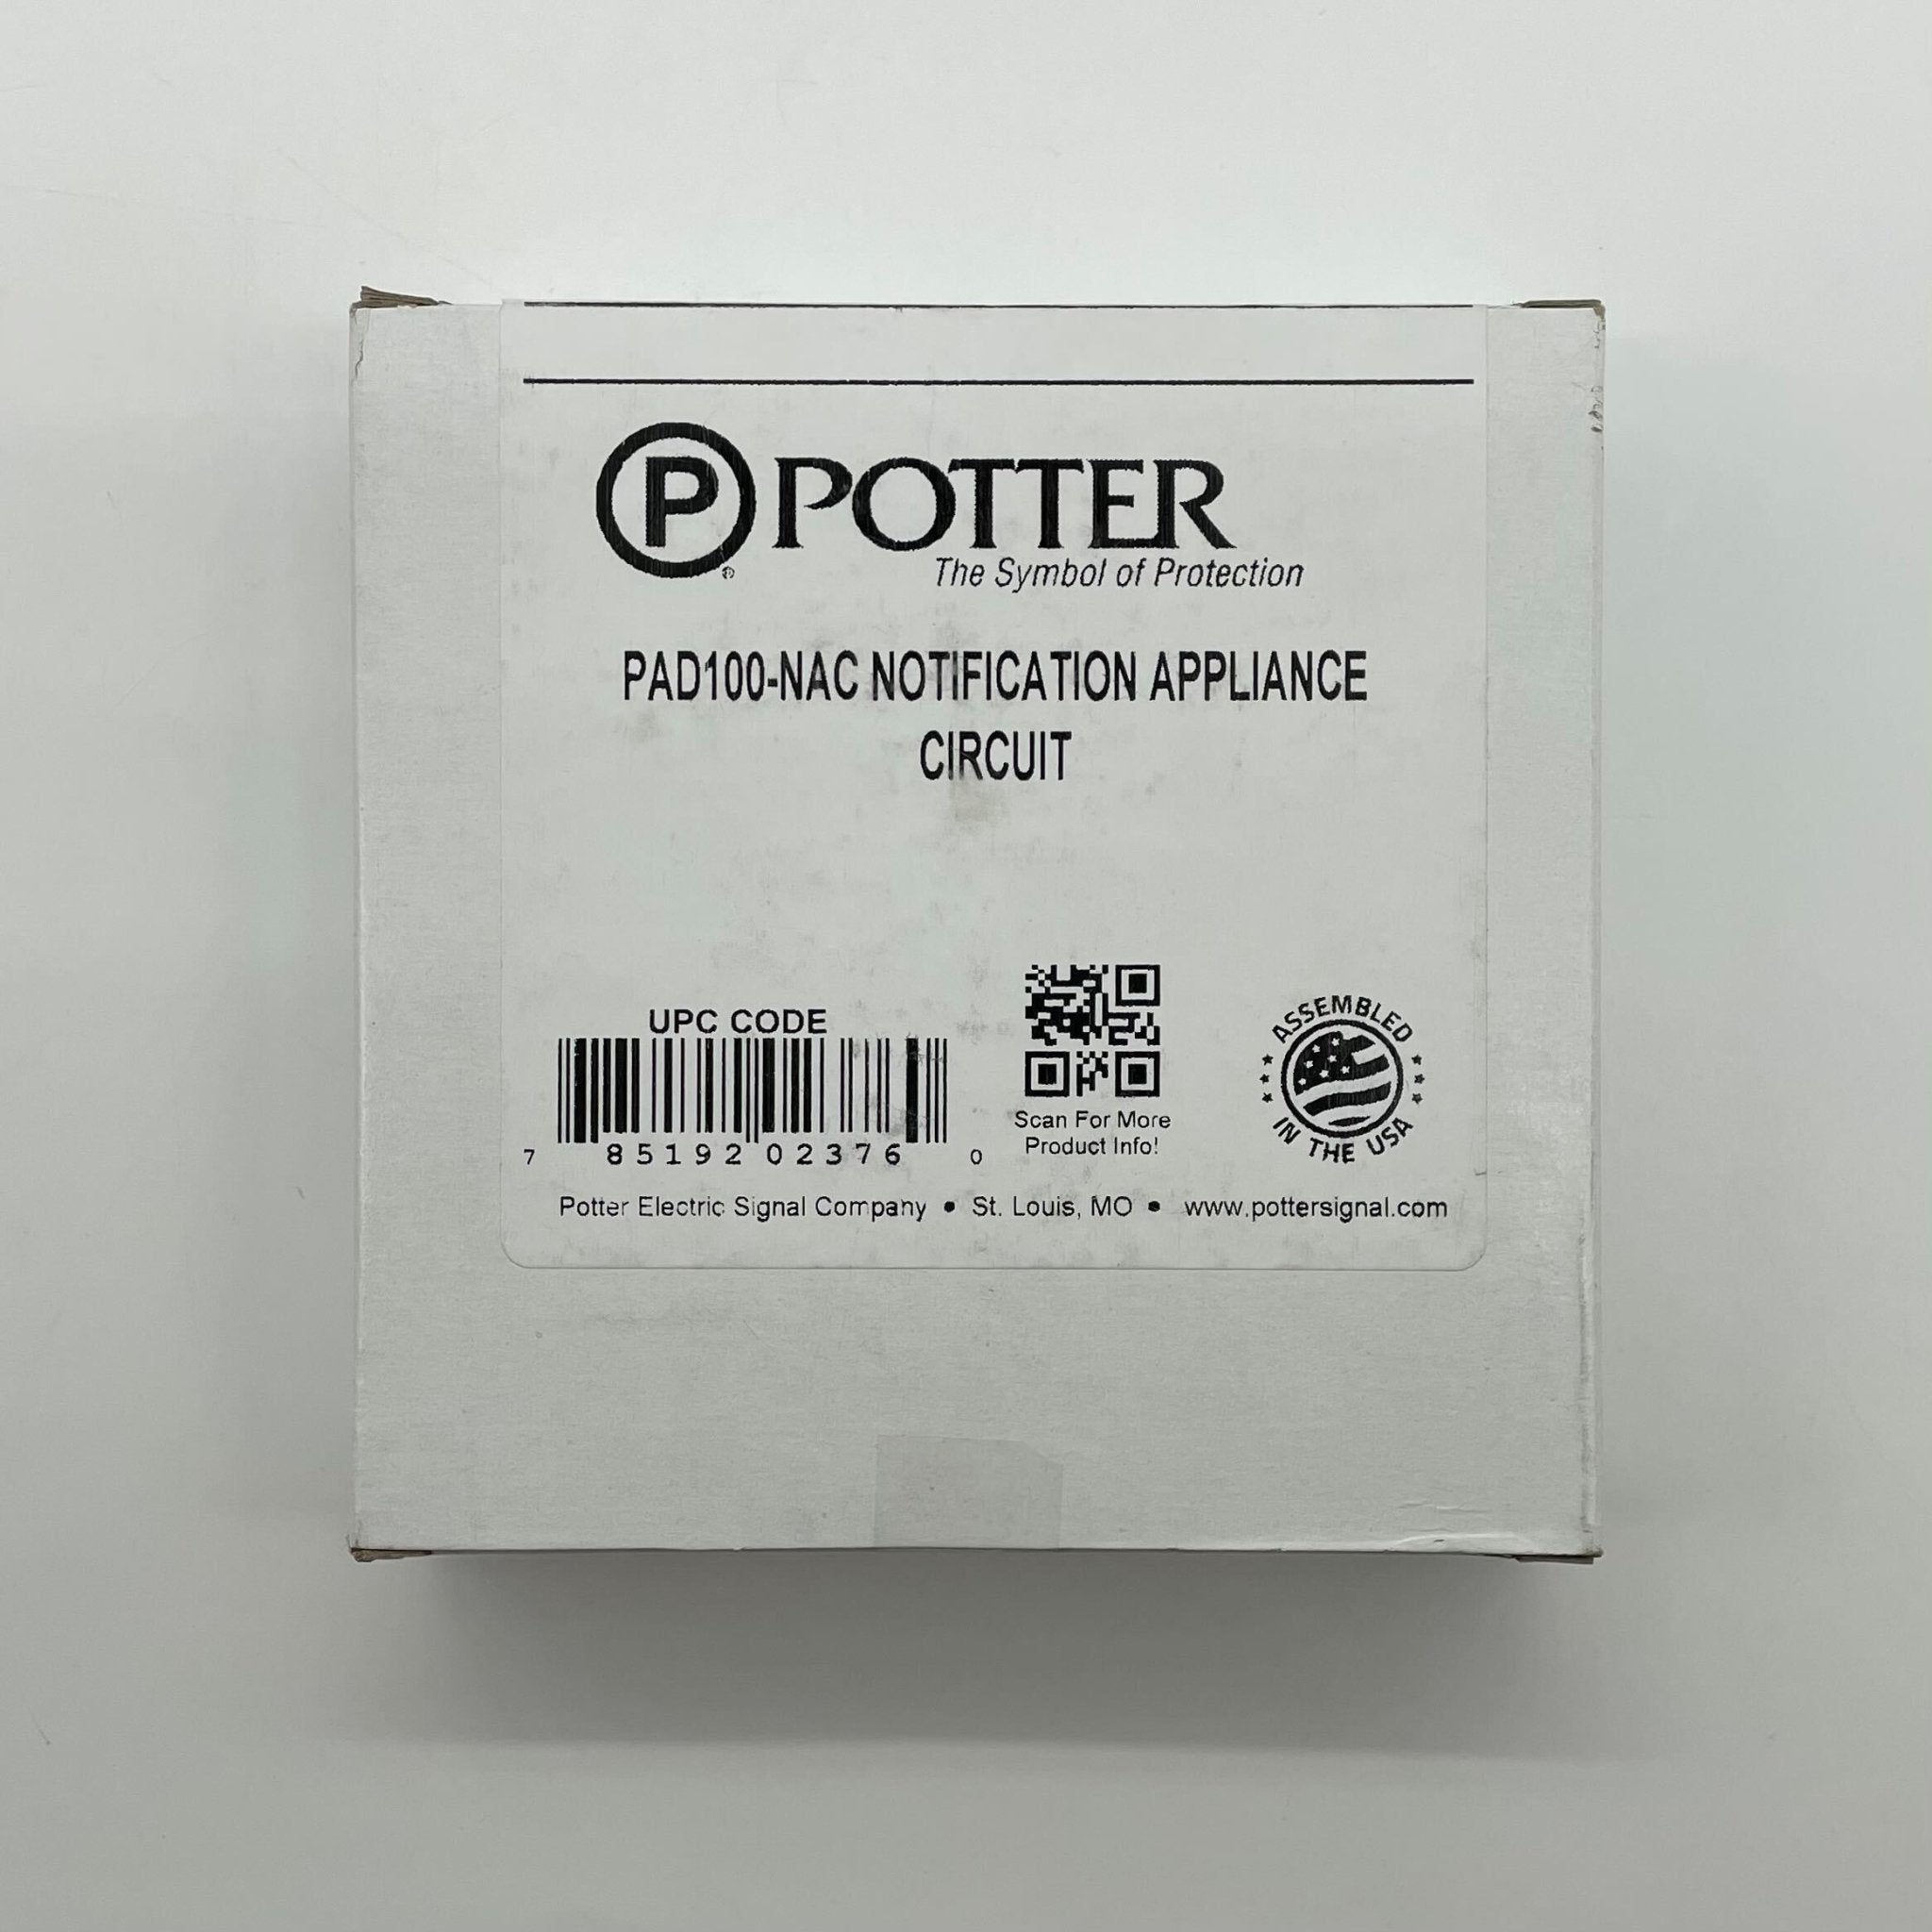 Potter PAD100-NAC - The Fire Alarm Supplier